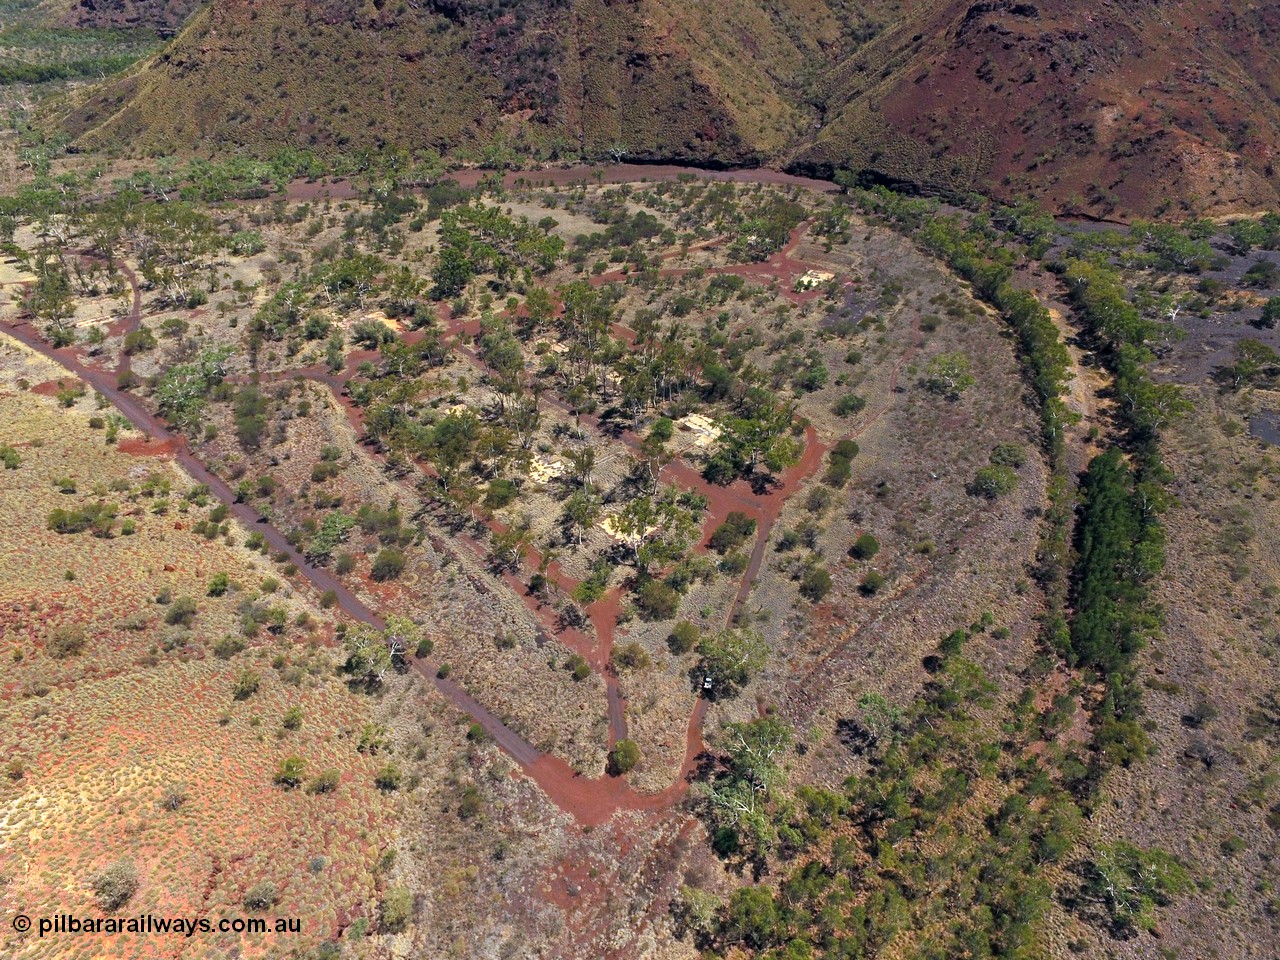 160101 DJI 0019
Wittenoom Gorge, view from above looking north over the former settlement, tailings from East Gorge visible on the right and Club Pool where the tree line ends in the middle. [url=https://goo.gl/maps/QjvaE8KCHGNmbpAo9]Geodata[/url].
